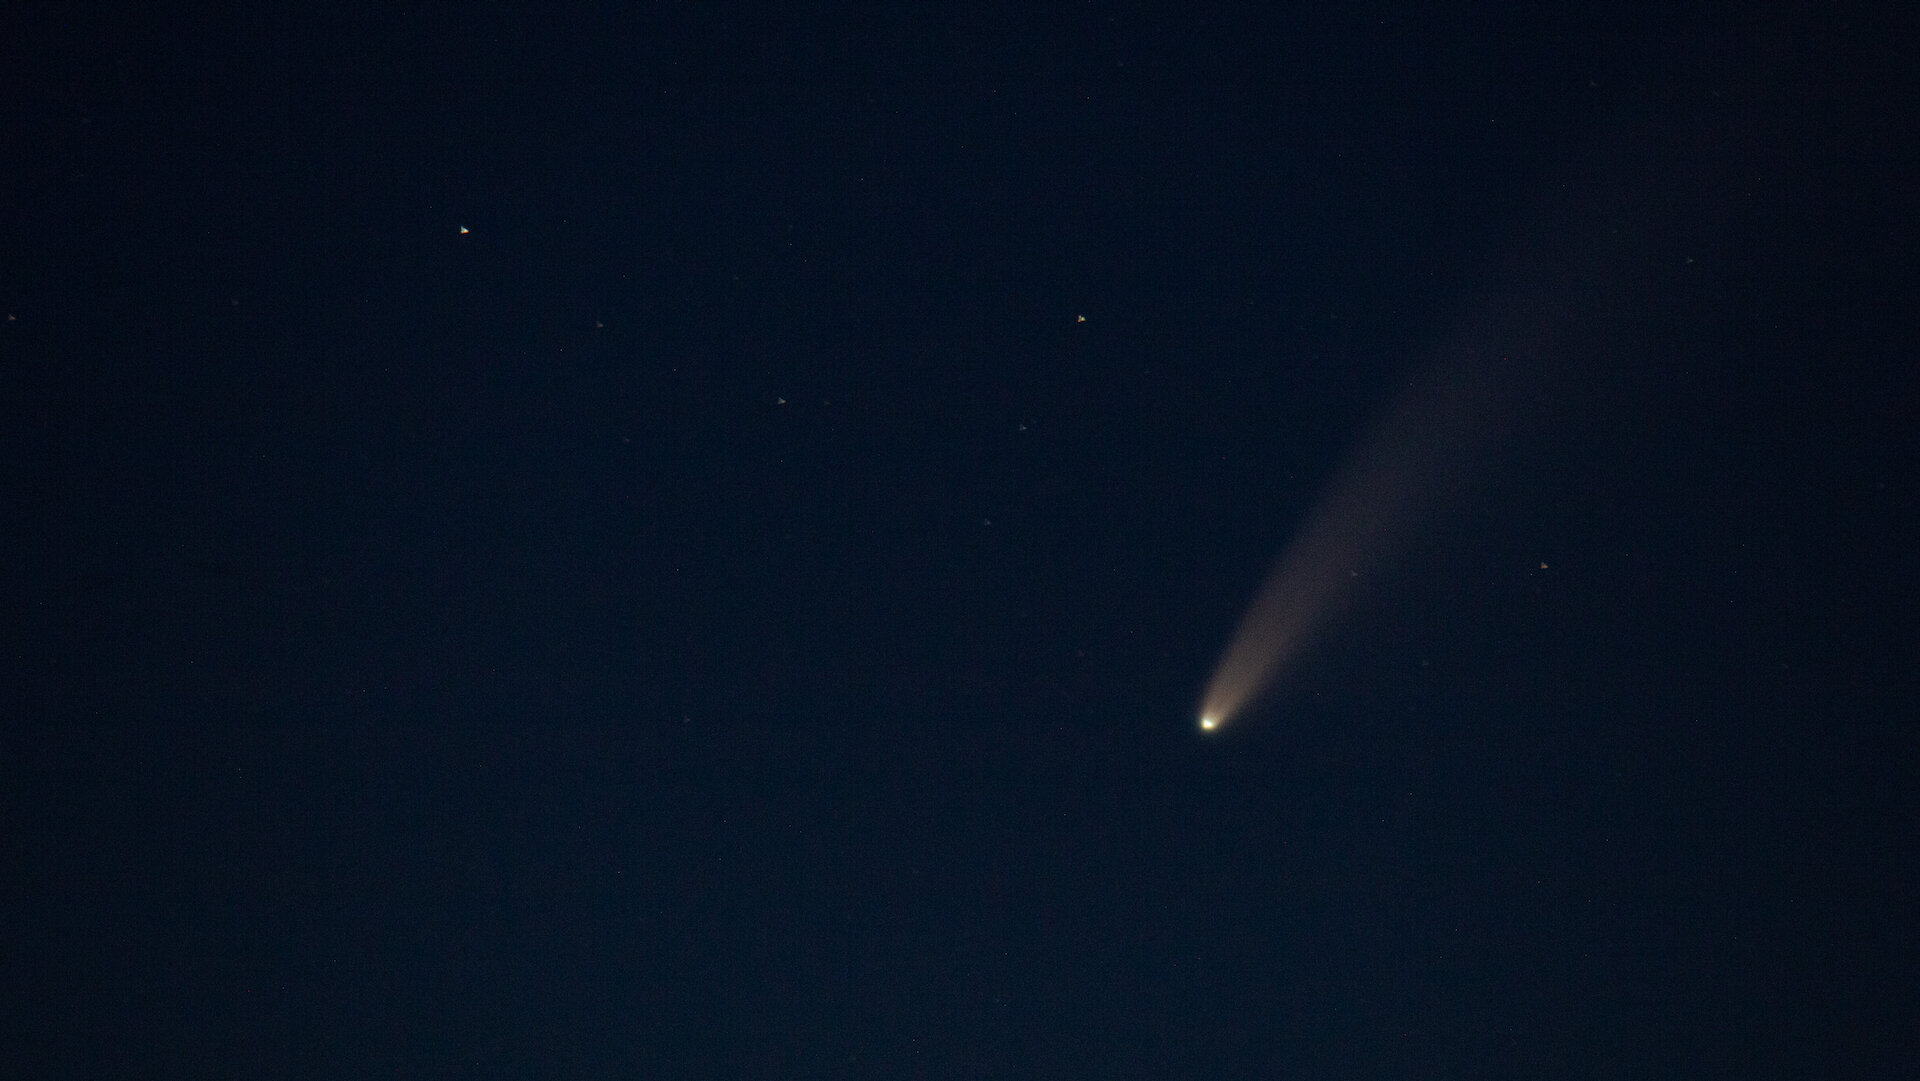  As it got darker, it became easier to see the comet. 